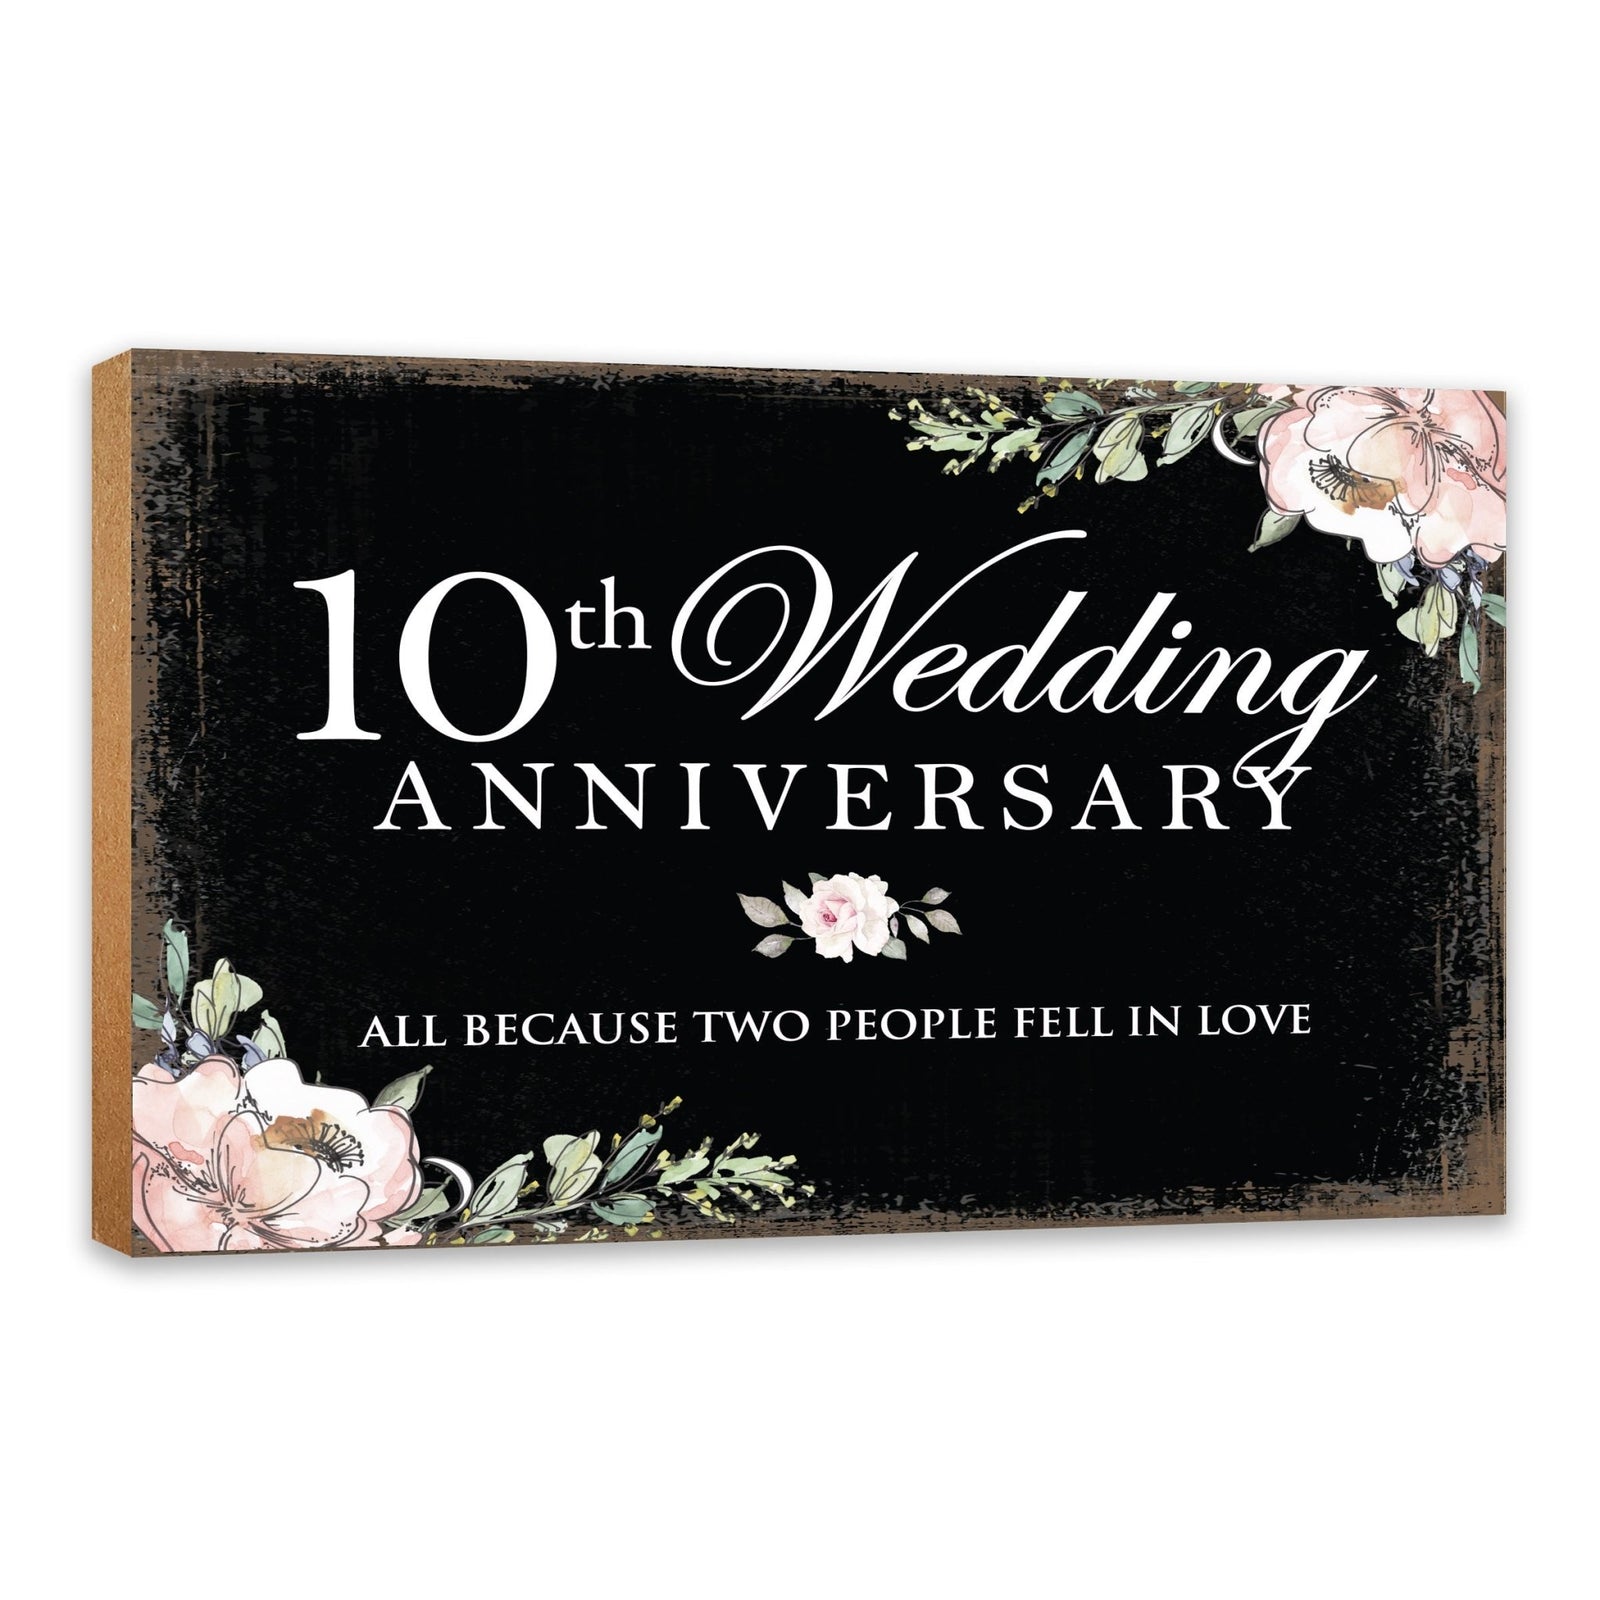 10th Wedding Anniversary Unique Shelf Decor and Tabletop Signs Gifts for Couples - Fell In Love - LifeSong Milestones